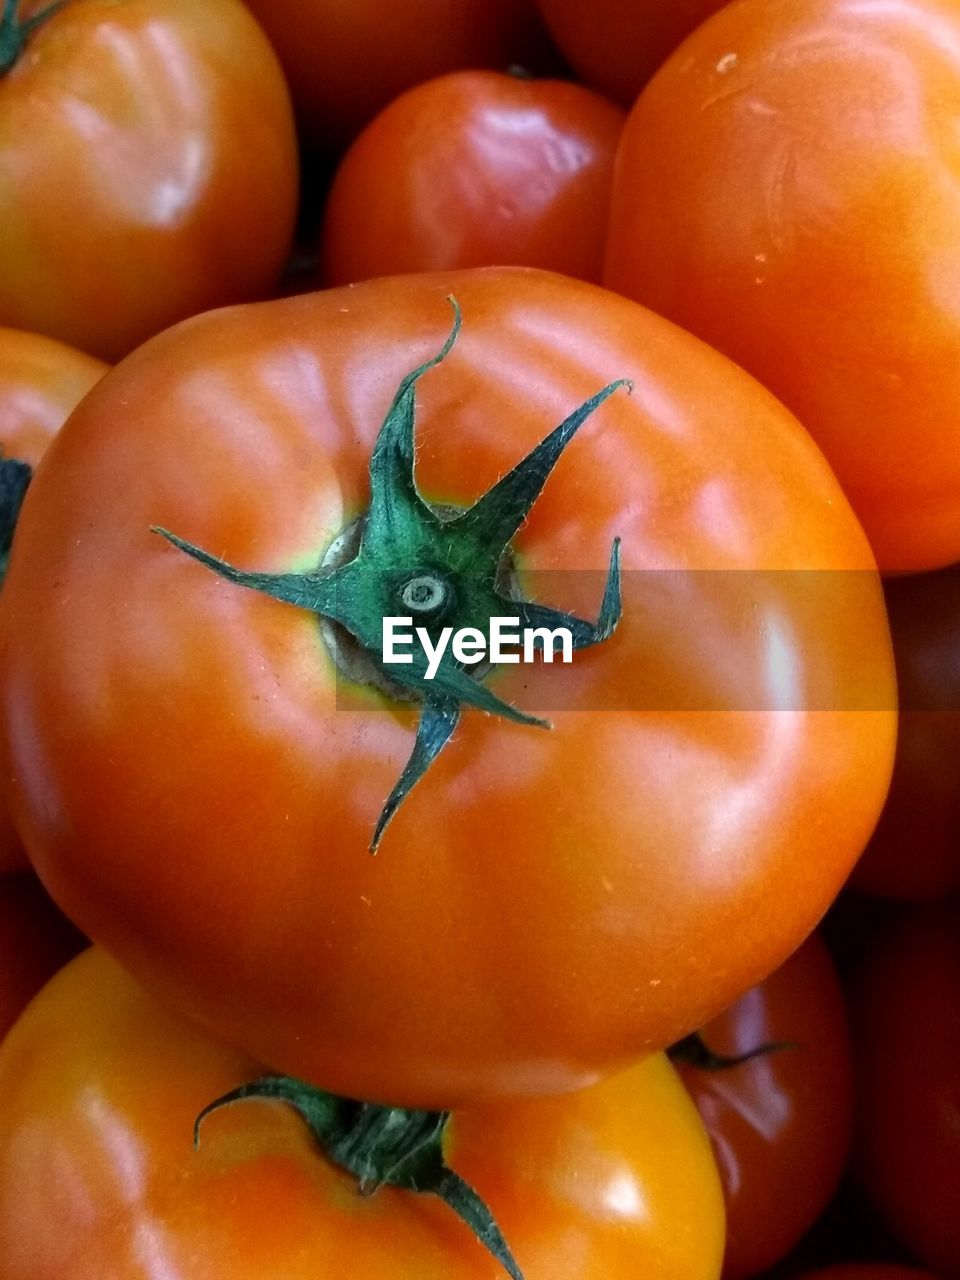 CLOSE-UP OF TOMATOES